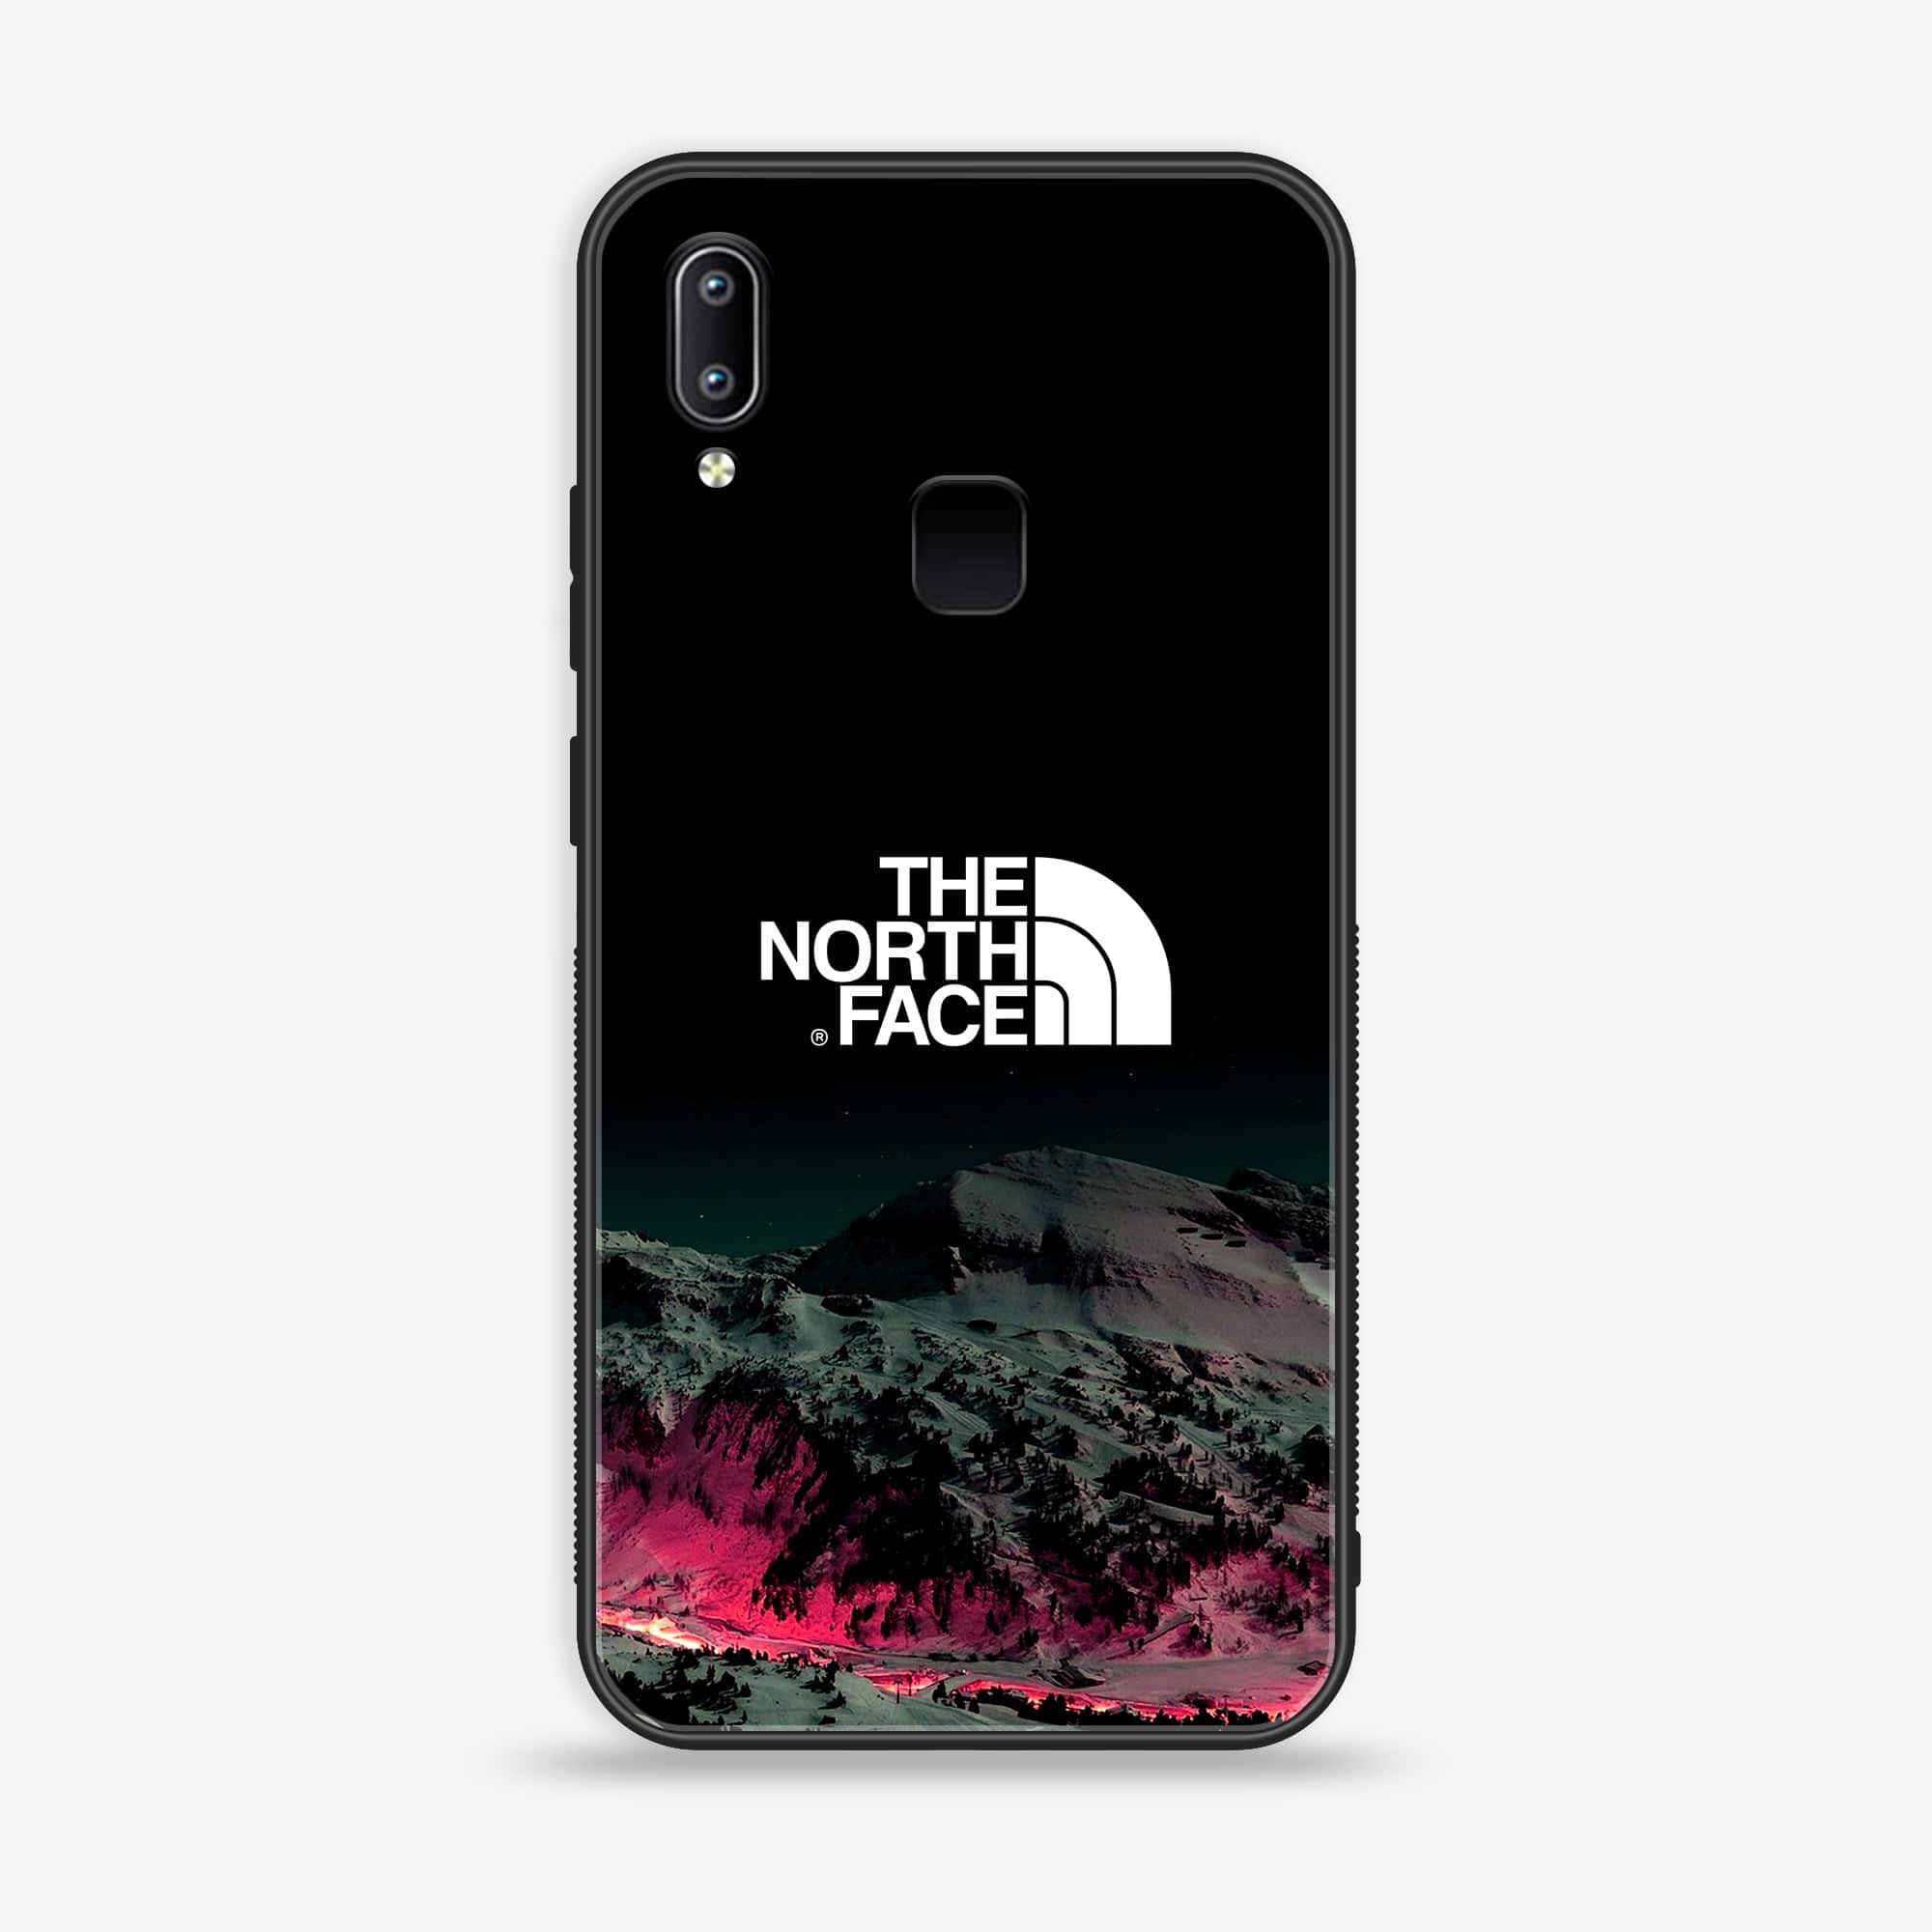 vivo Y95 - The North Face Series - Premium Printed Glass soft Bumper shock Proof Case